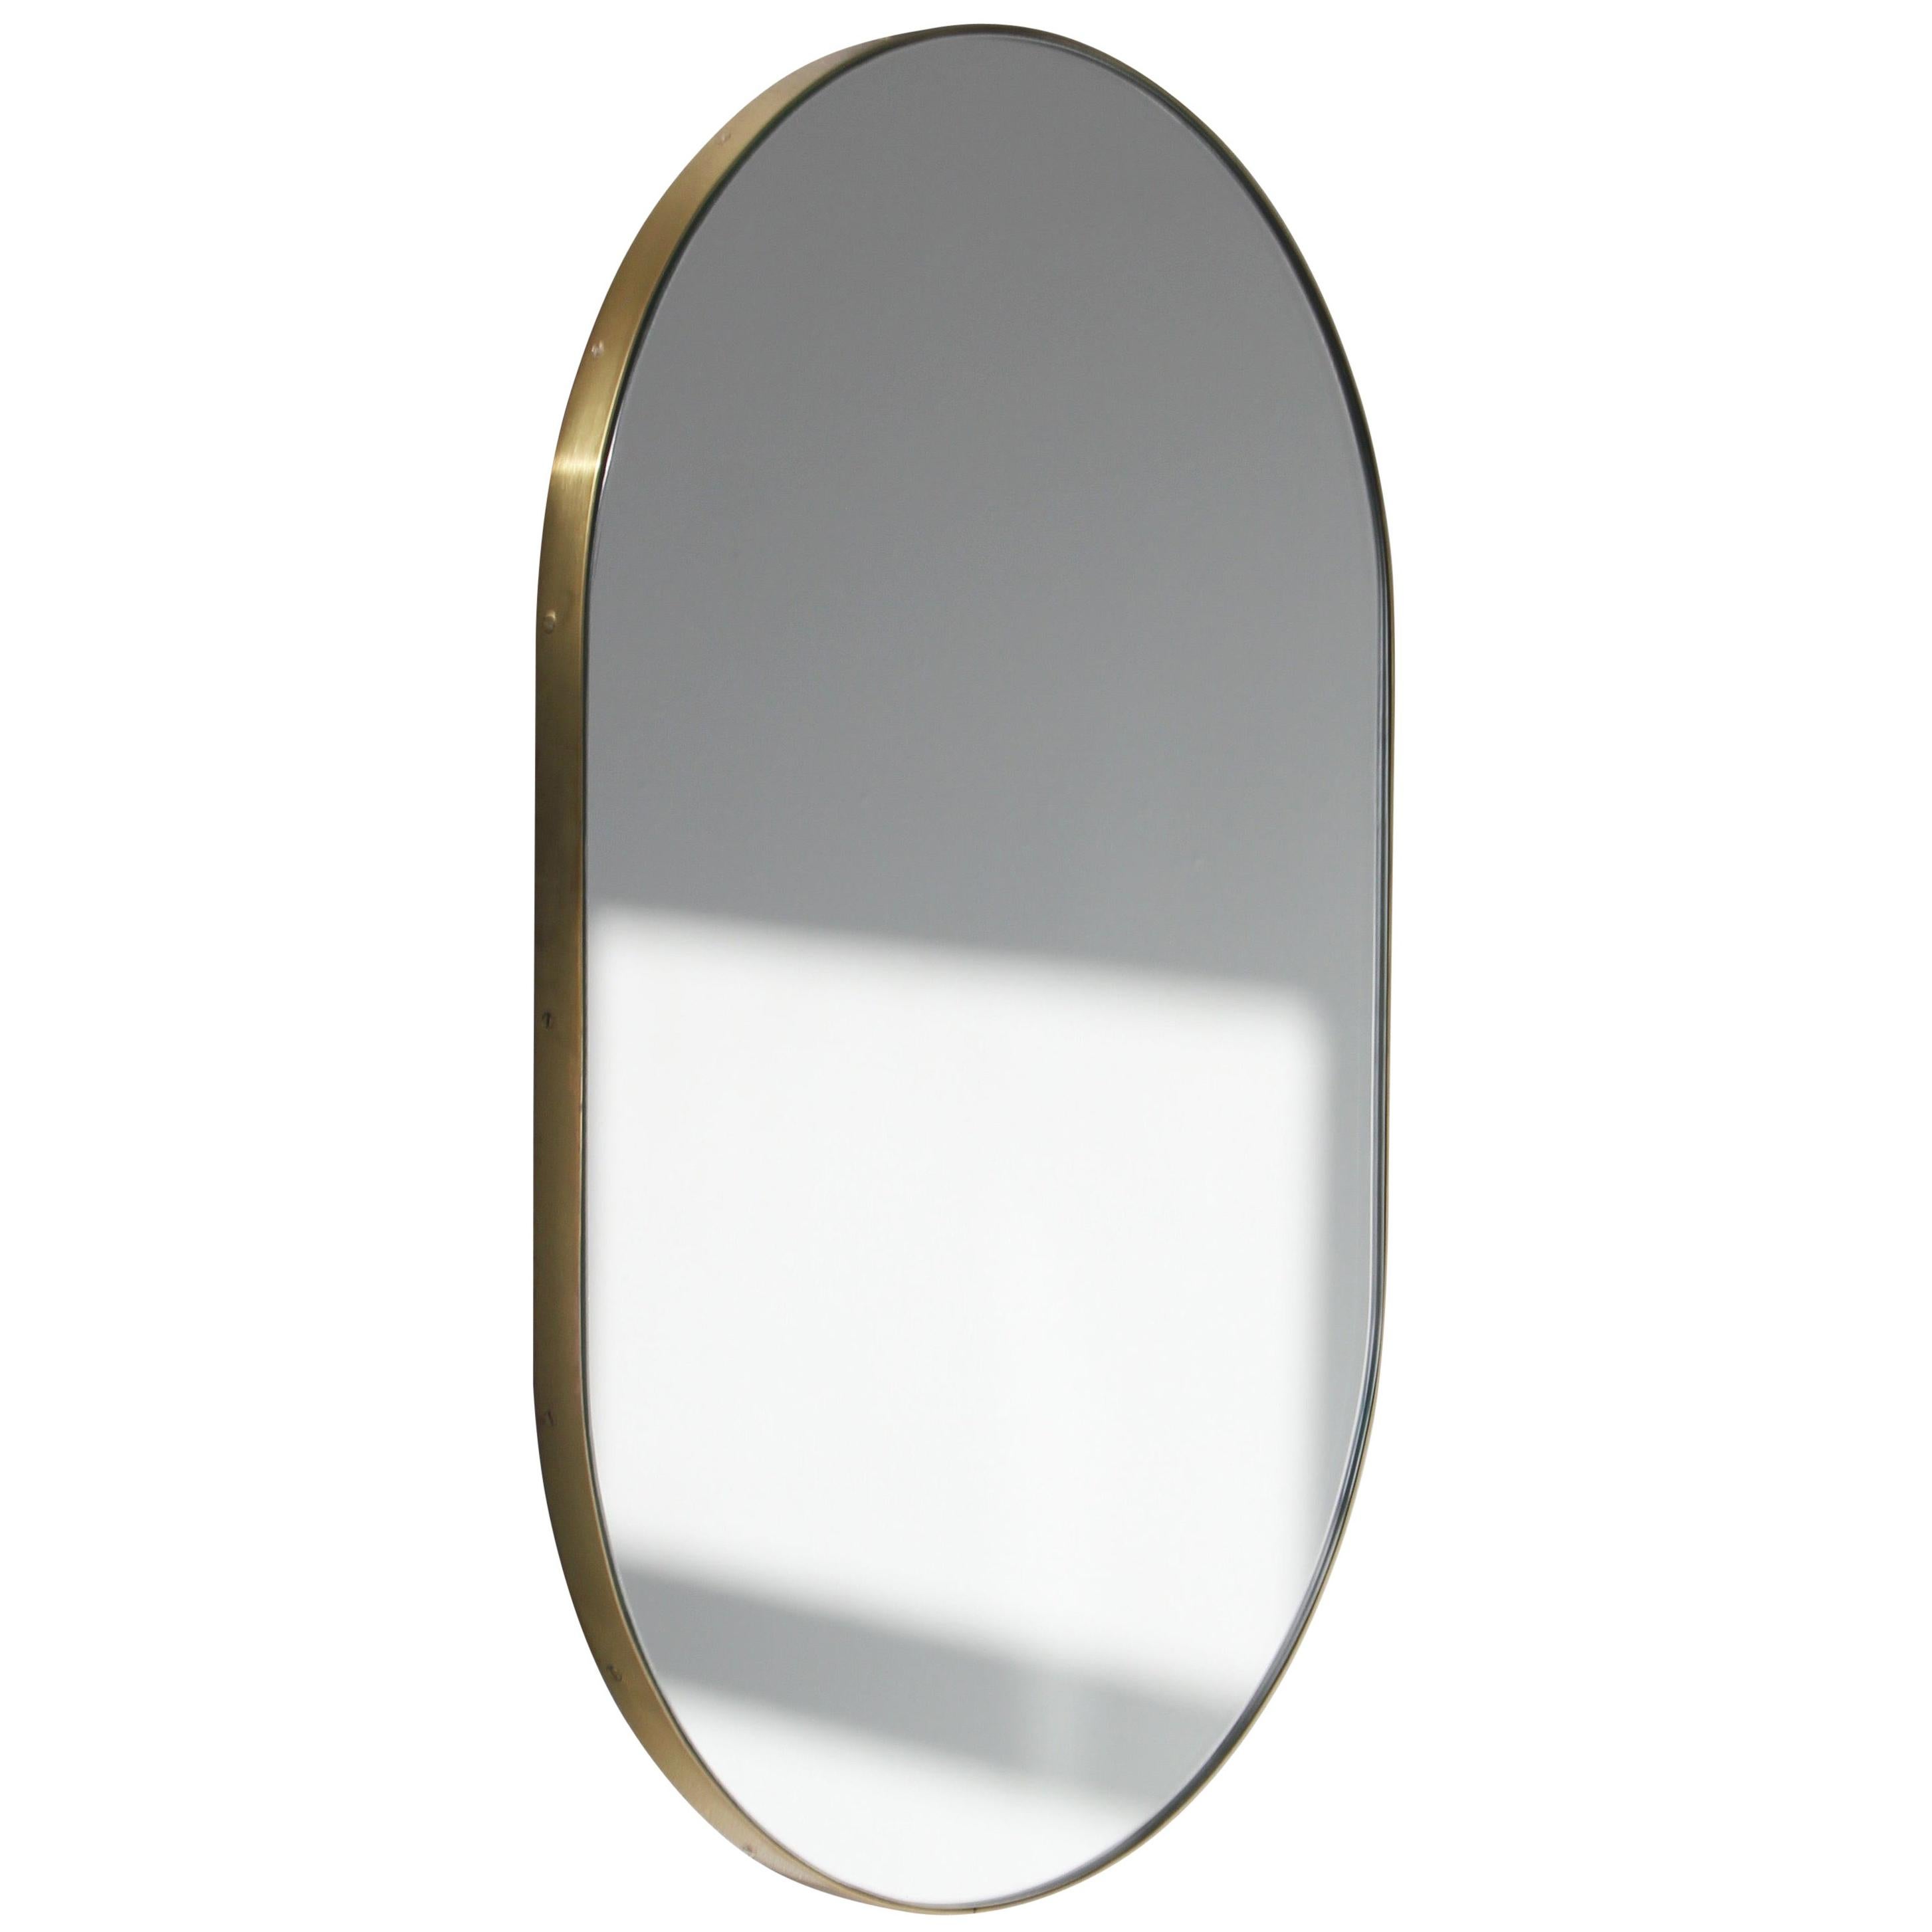 Capsula Capsule Pill Shape Elegant Mirror with Brass Frame, Large